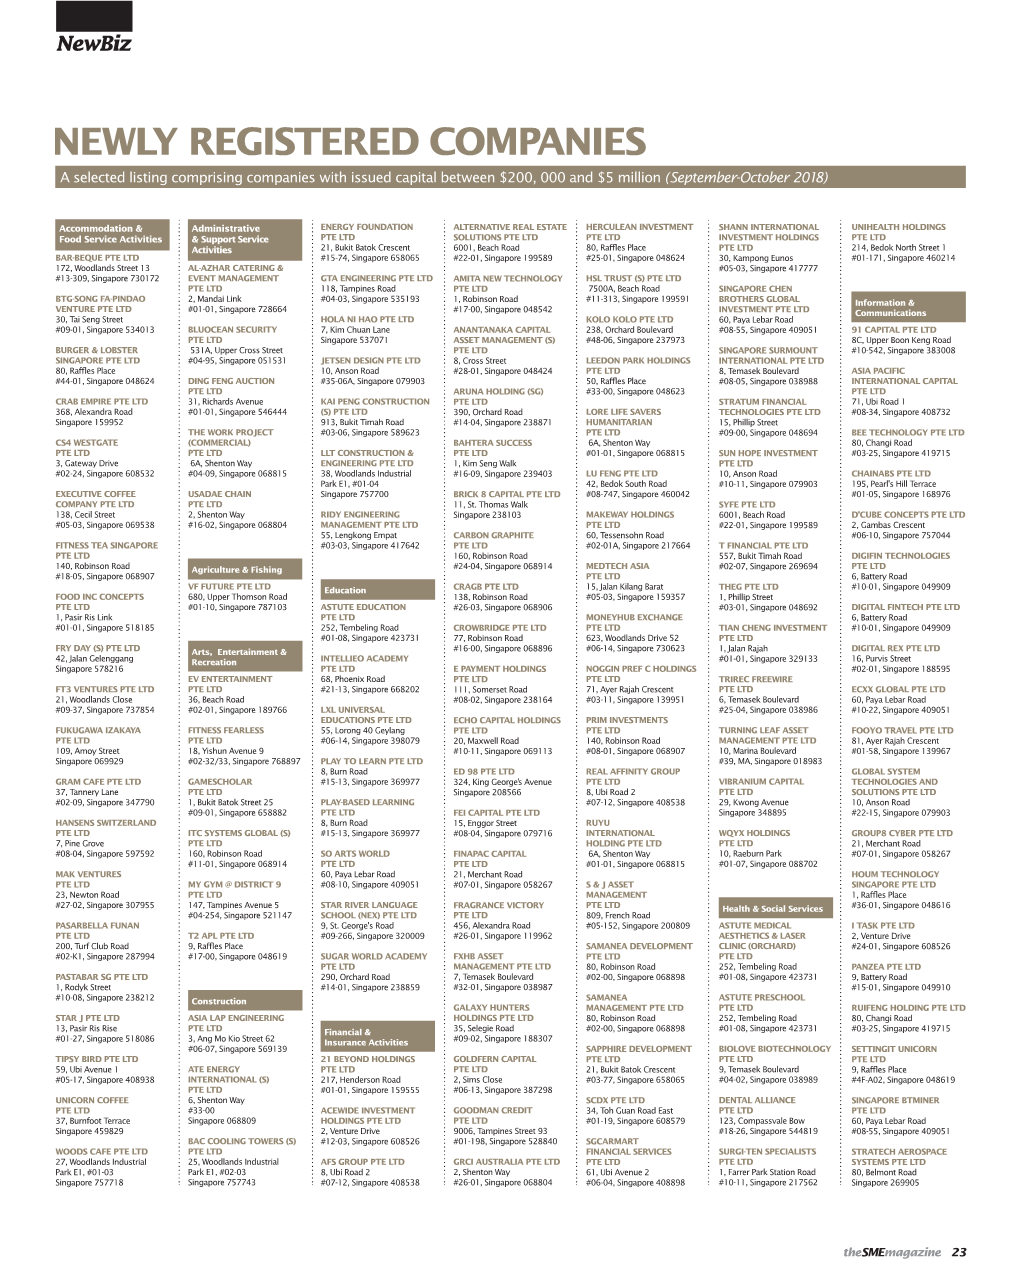 NEWLY REGISTERED COMPANIES a Selected Listing Comprising Companies with Issued Capital Between $200, 000 and $5 Million (September-October 2018)